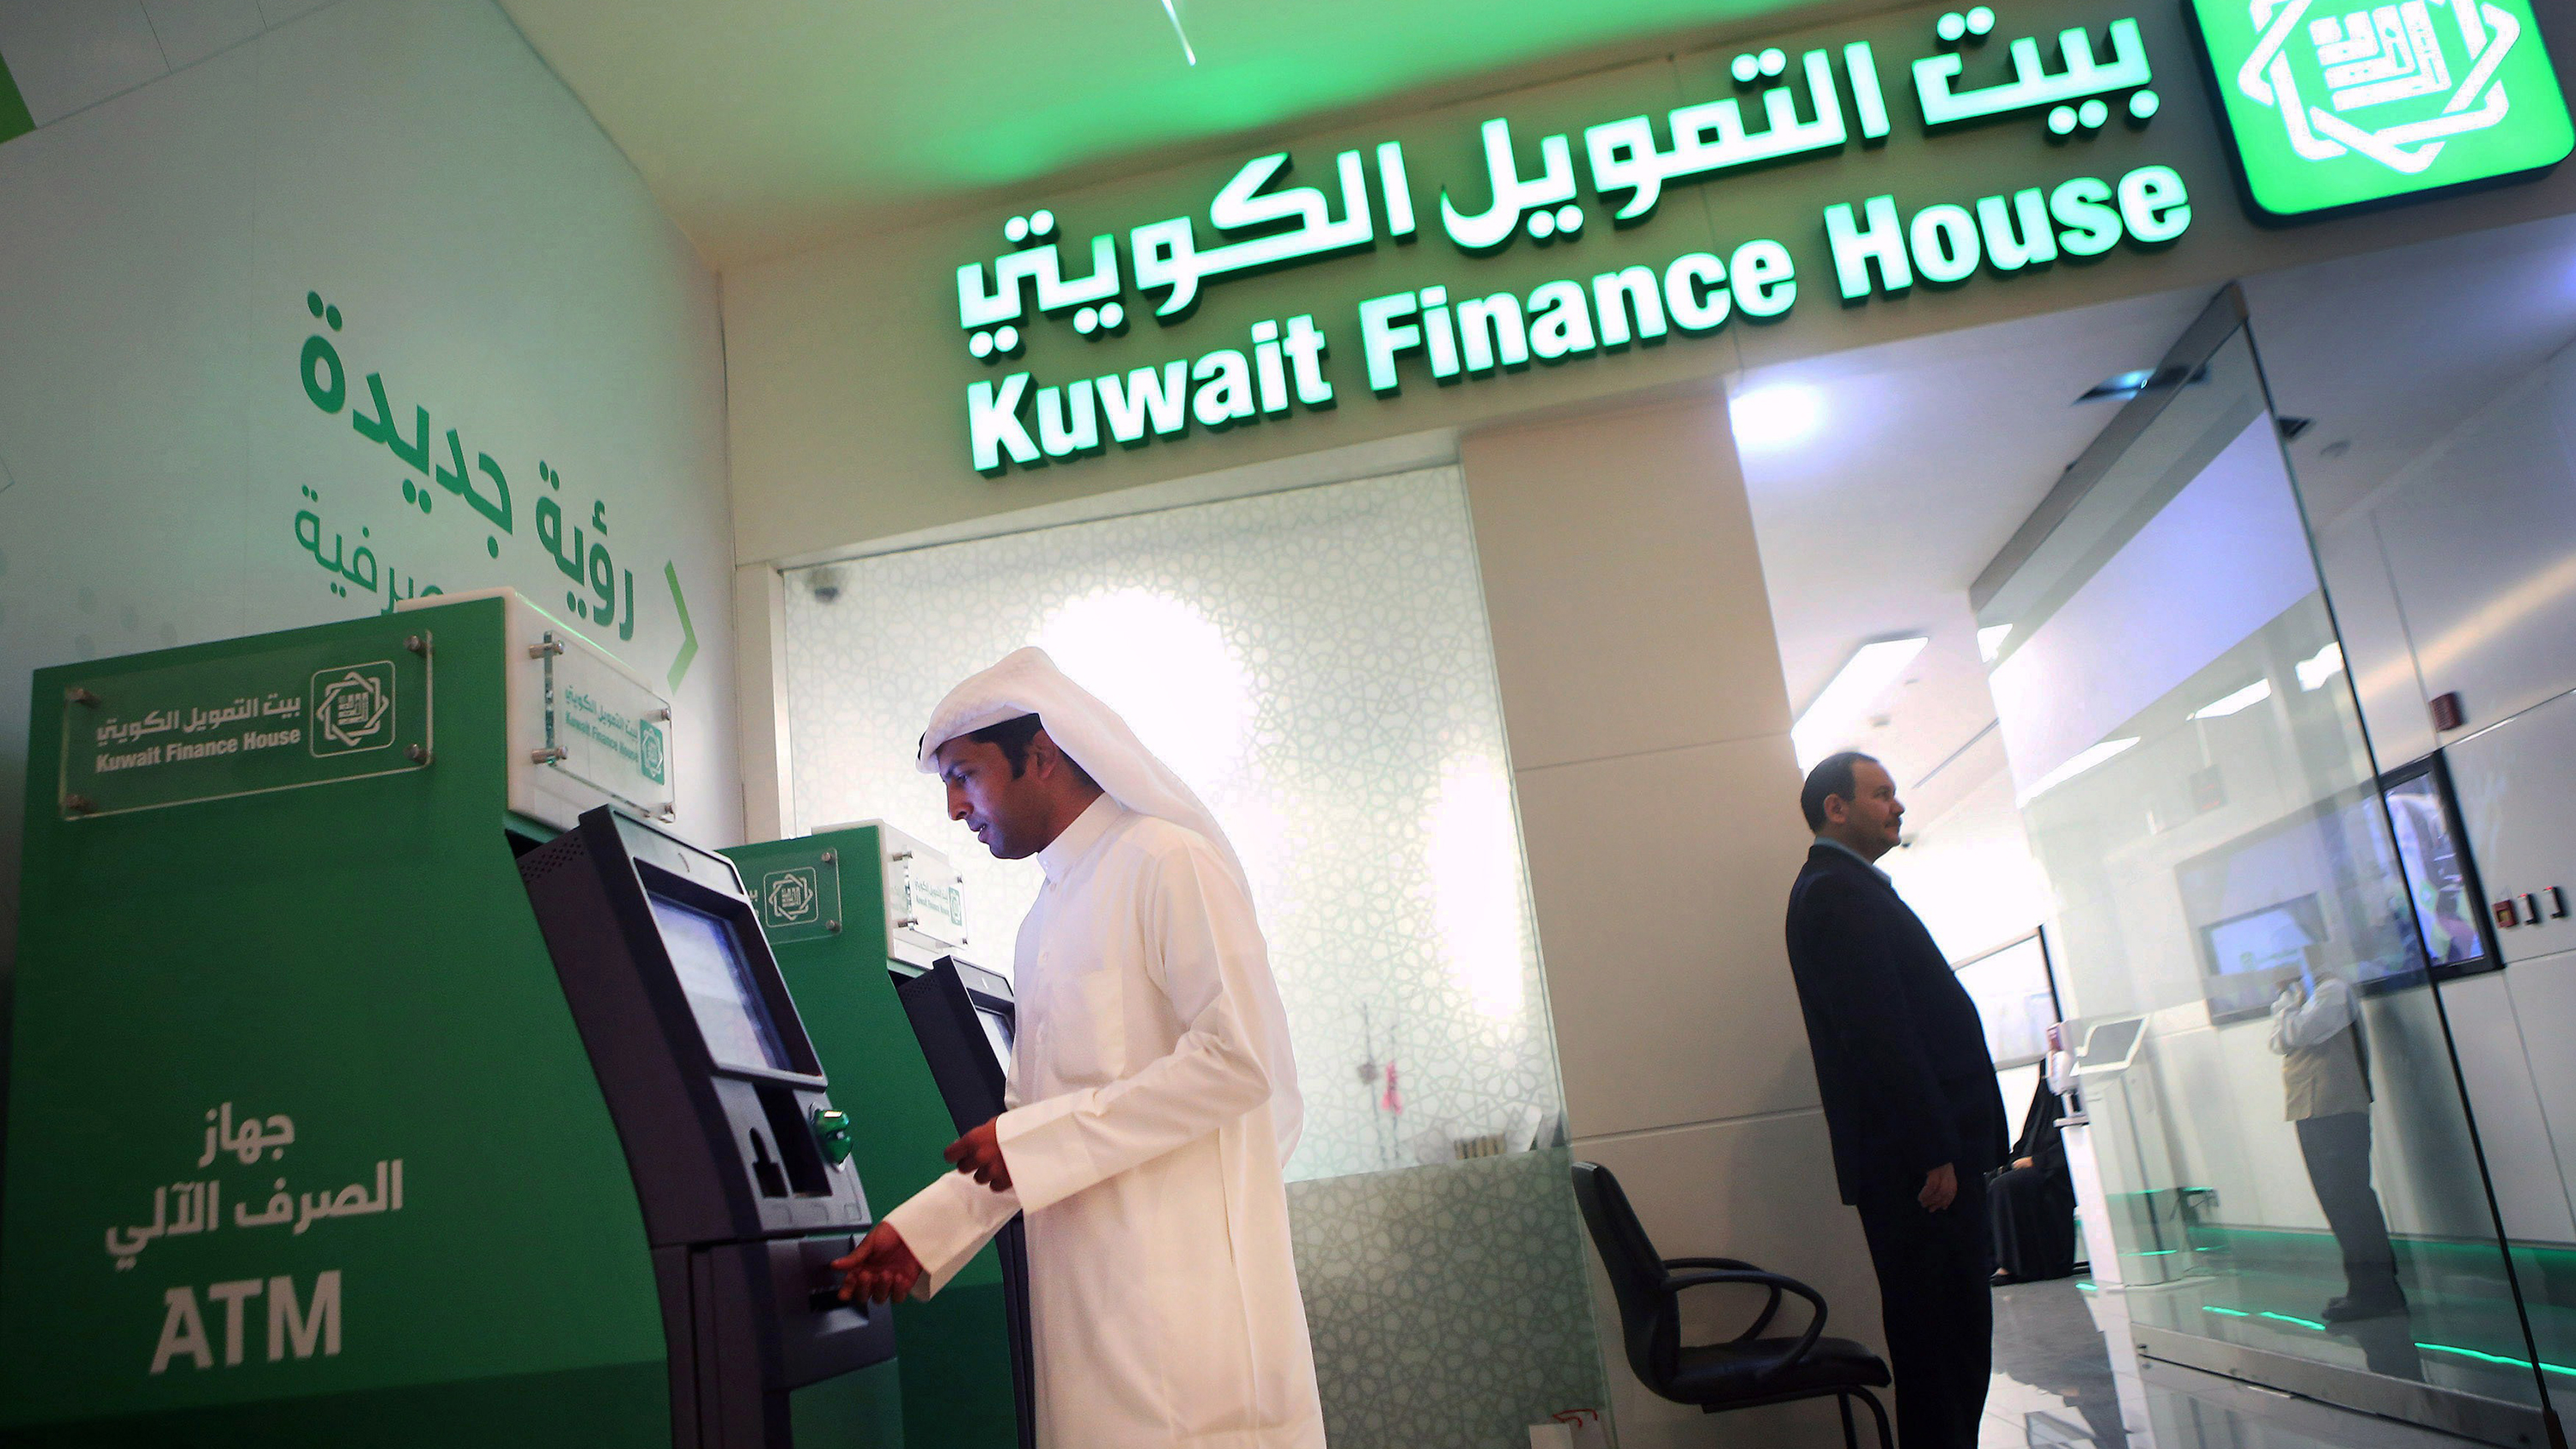 A man withdraws cash from an ATM at a Kuwait Finance House branch.